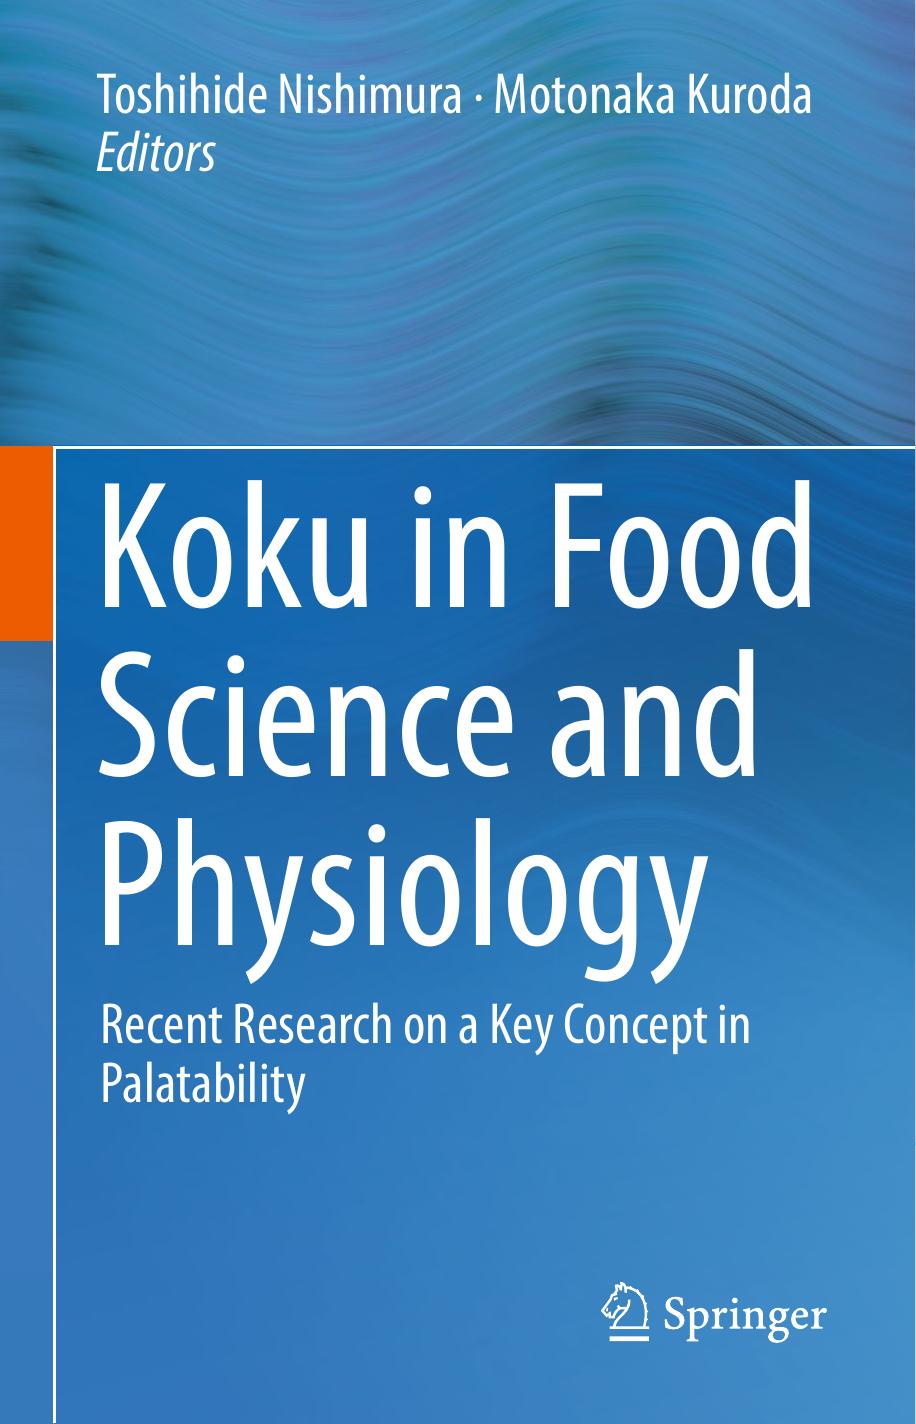 Koku in Food Science and Physiology  Recent Research on a Key Concept in Palatability-Springer Singapore (2019)